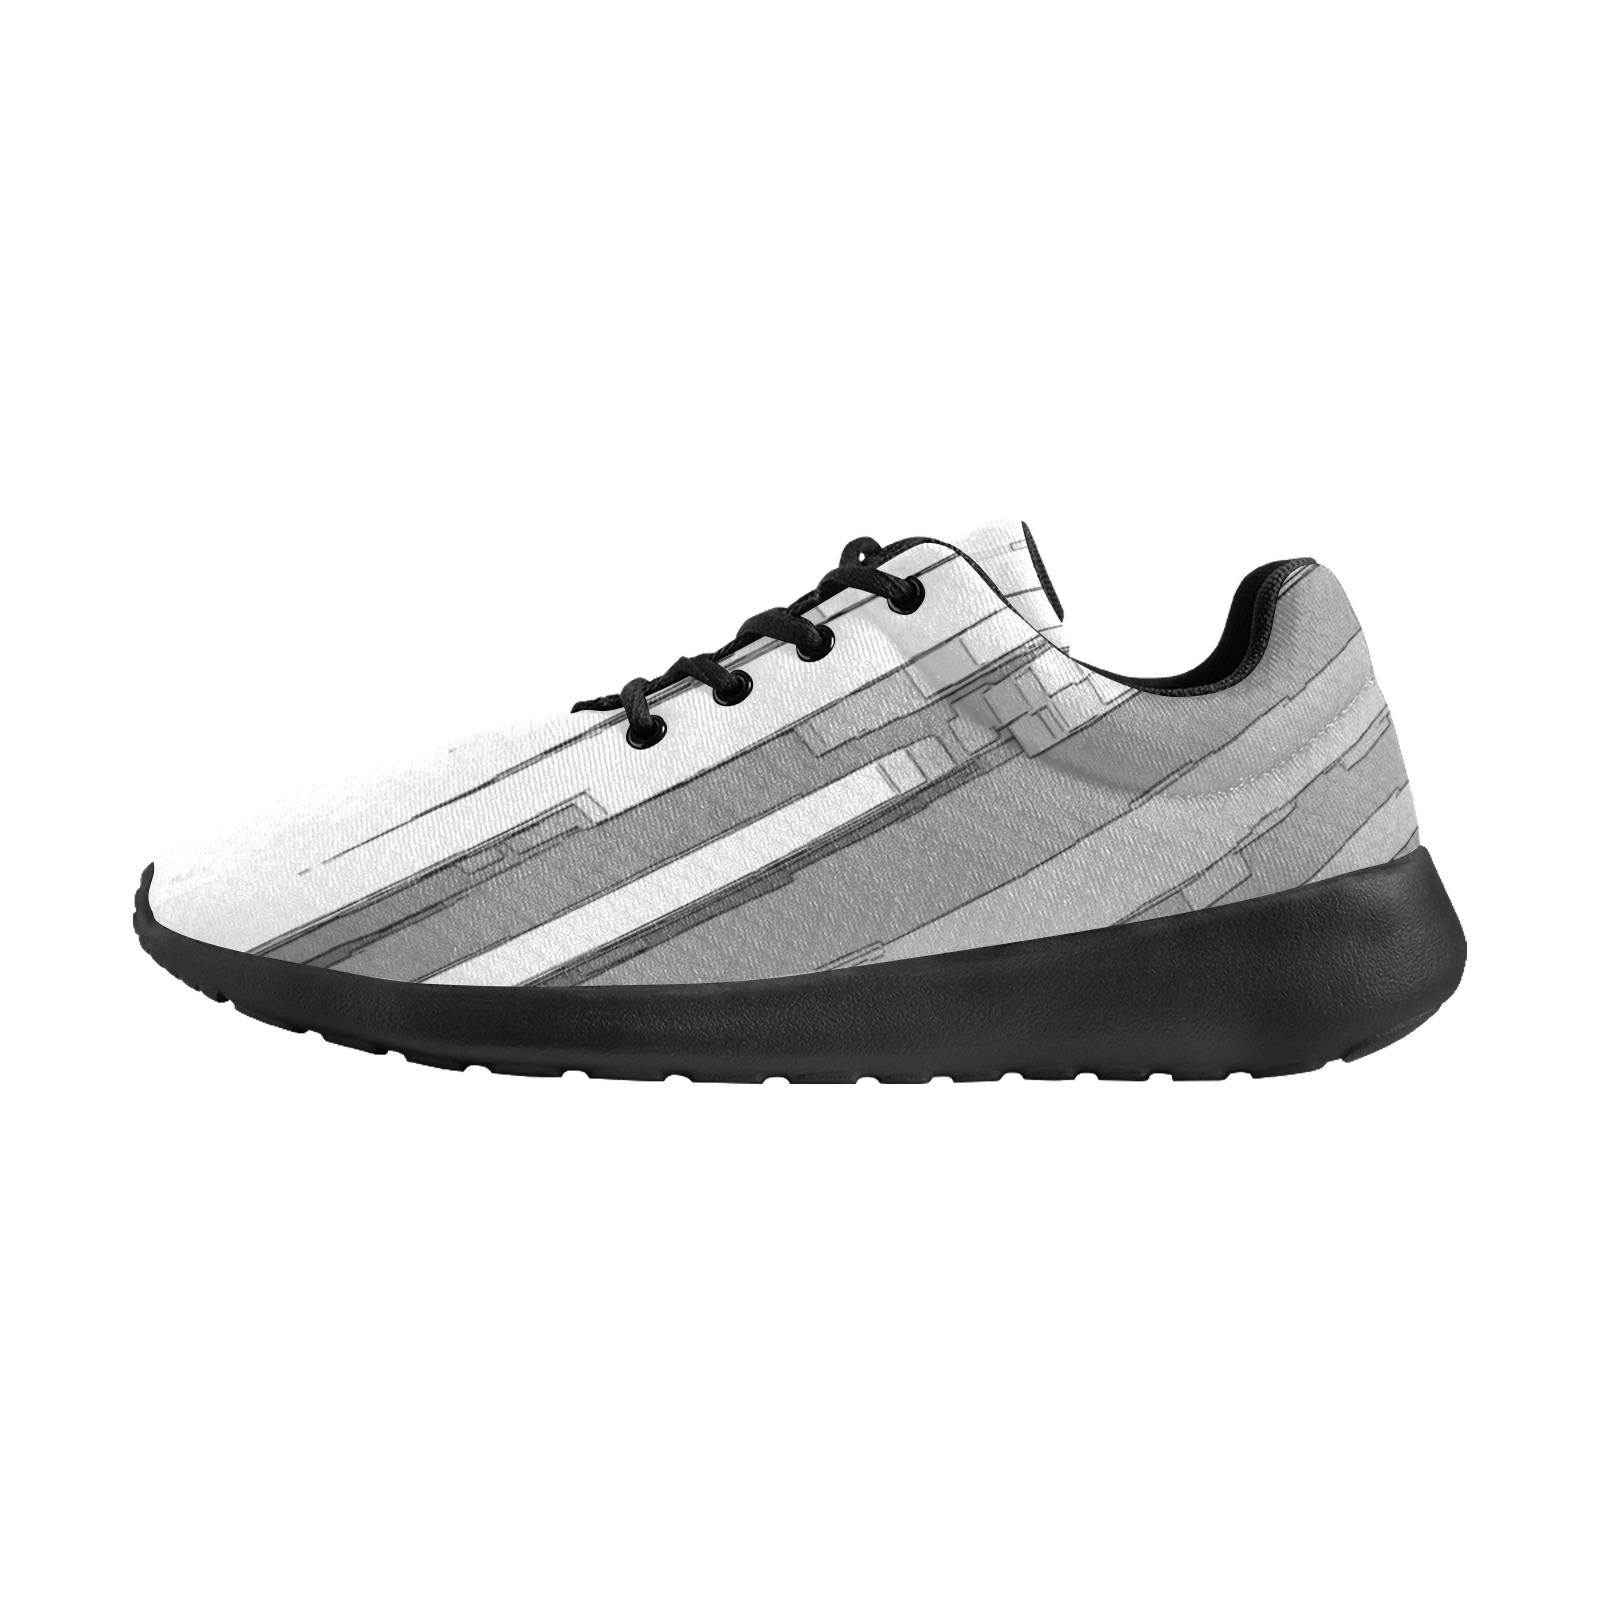 Greyscale Abstract B&W Art Men's Athletic Shoes (Model 0200)